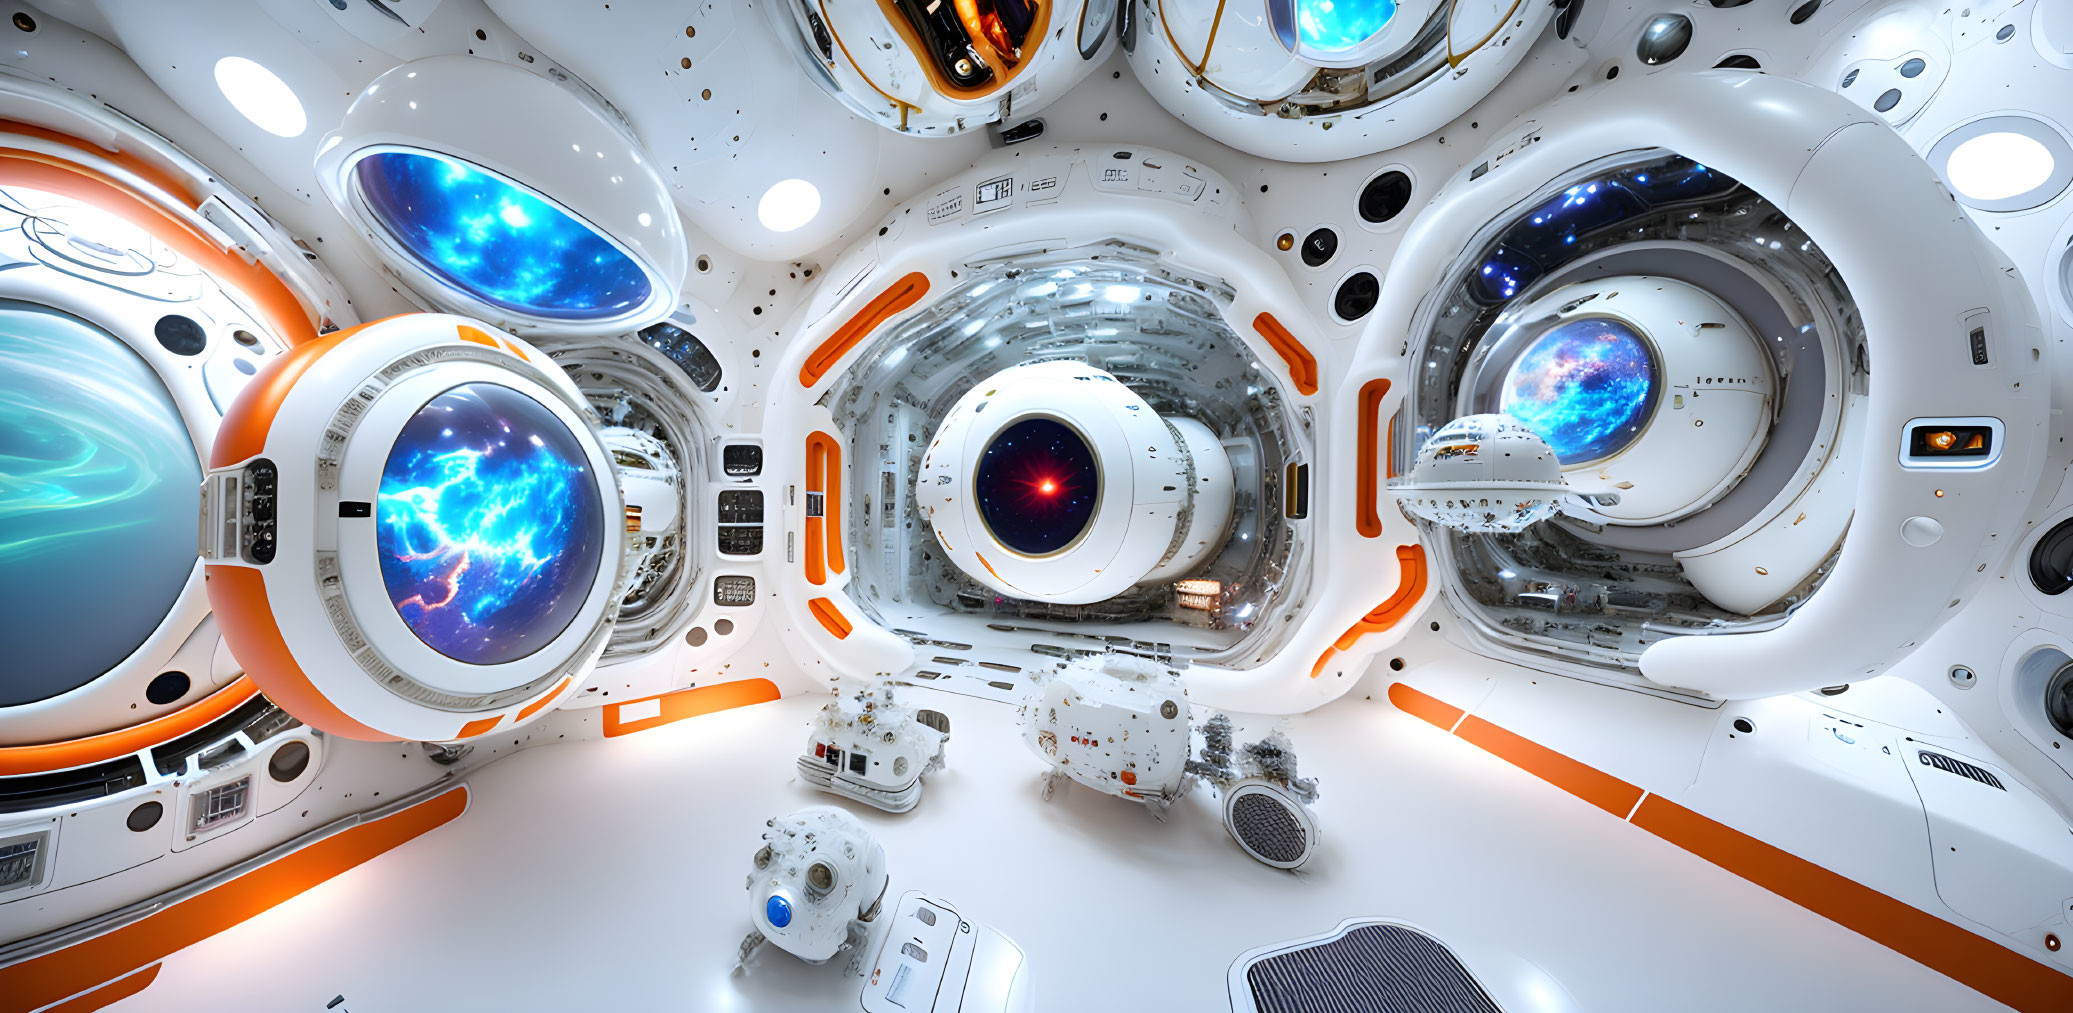 Futuristic spacecraft interior with cosmic viewports and high-tech equipment